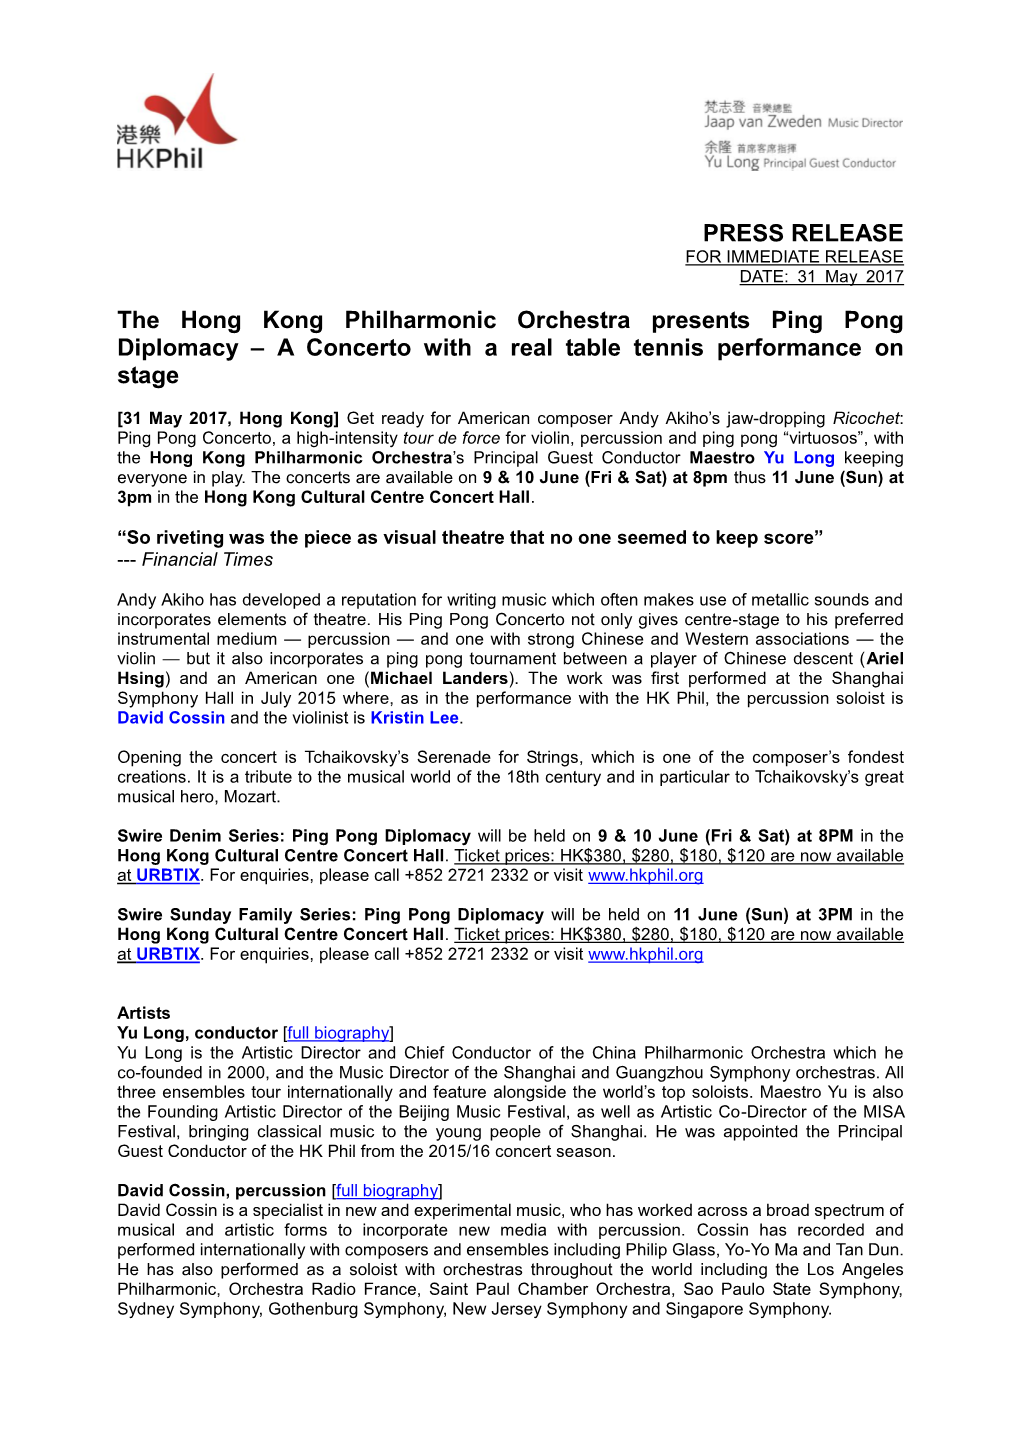 PRESS RELEASE the Hong Kong Philharmonic Orchestra Presents